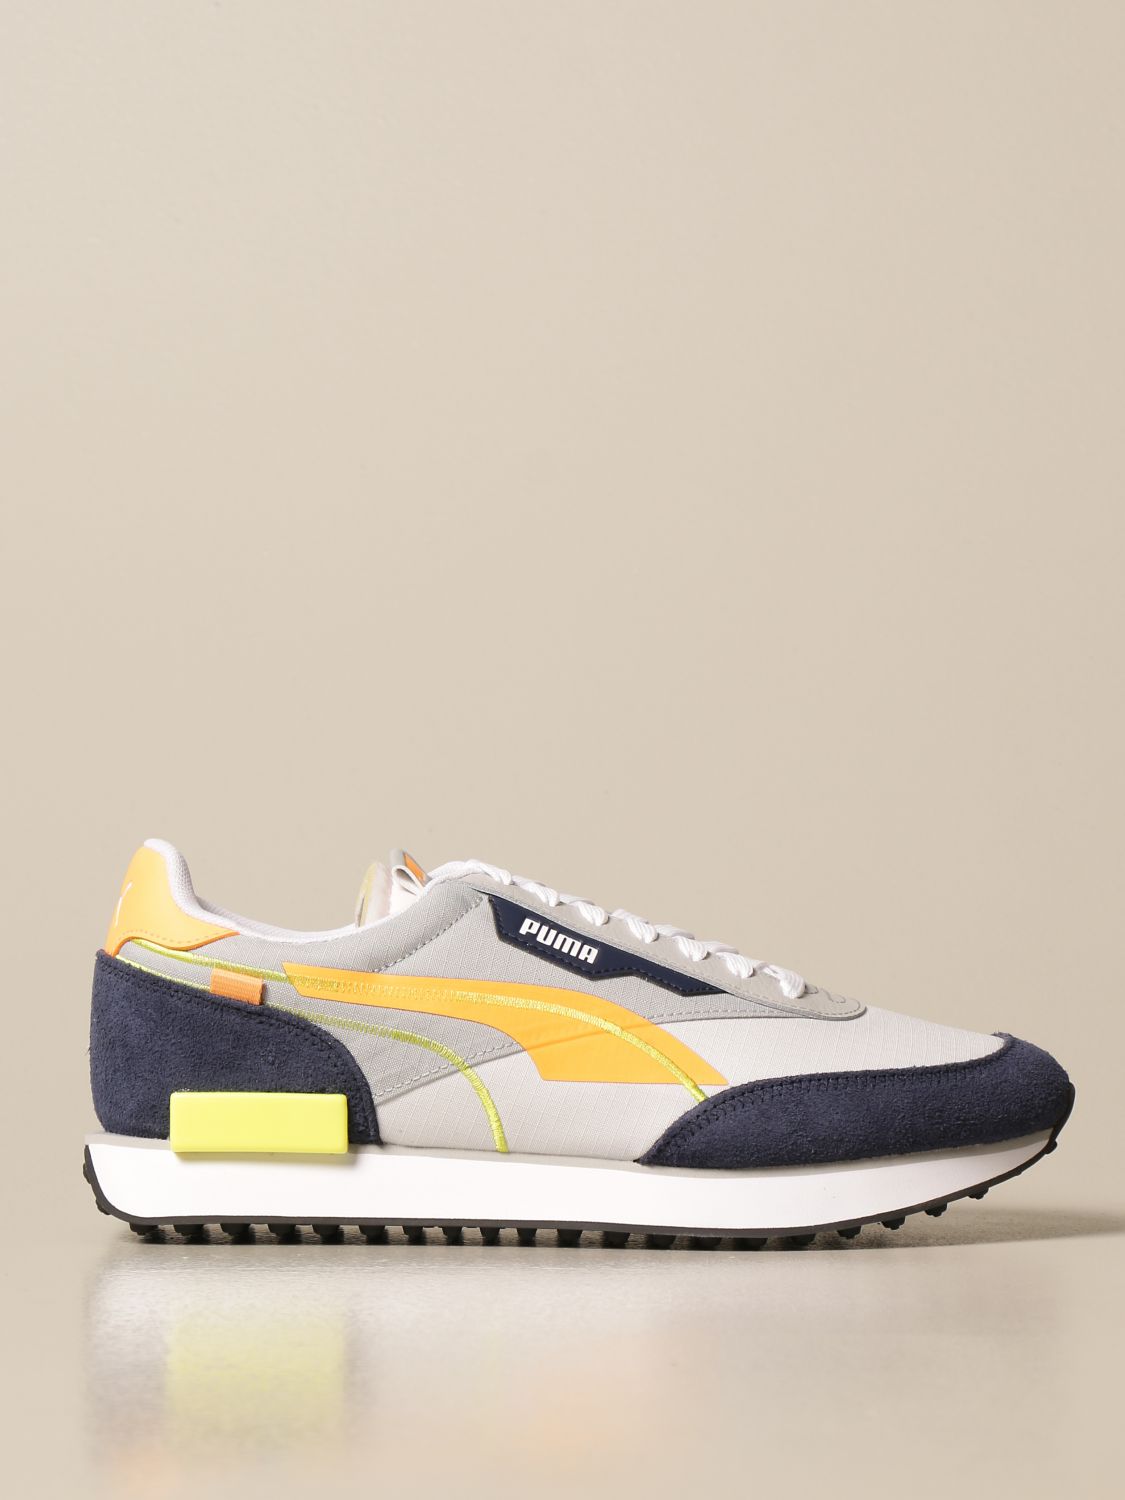 Puma Outlet Future Rider Twofold Sd Sneakers In Canvas And Synthetic Leather Sneakers Puma Men Grey Sneakers Puma Giglio En